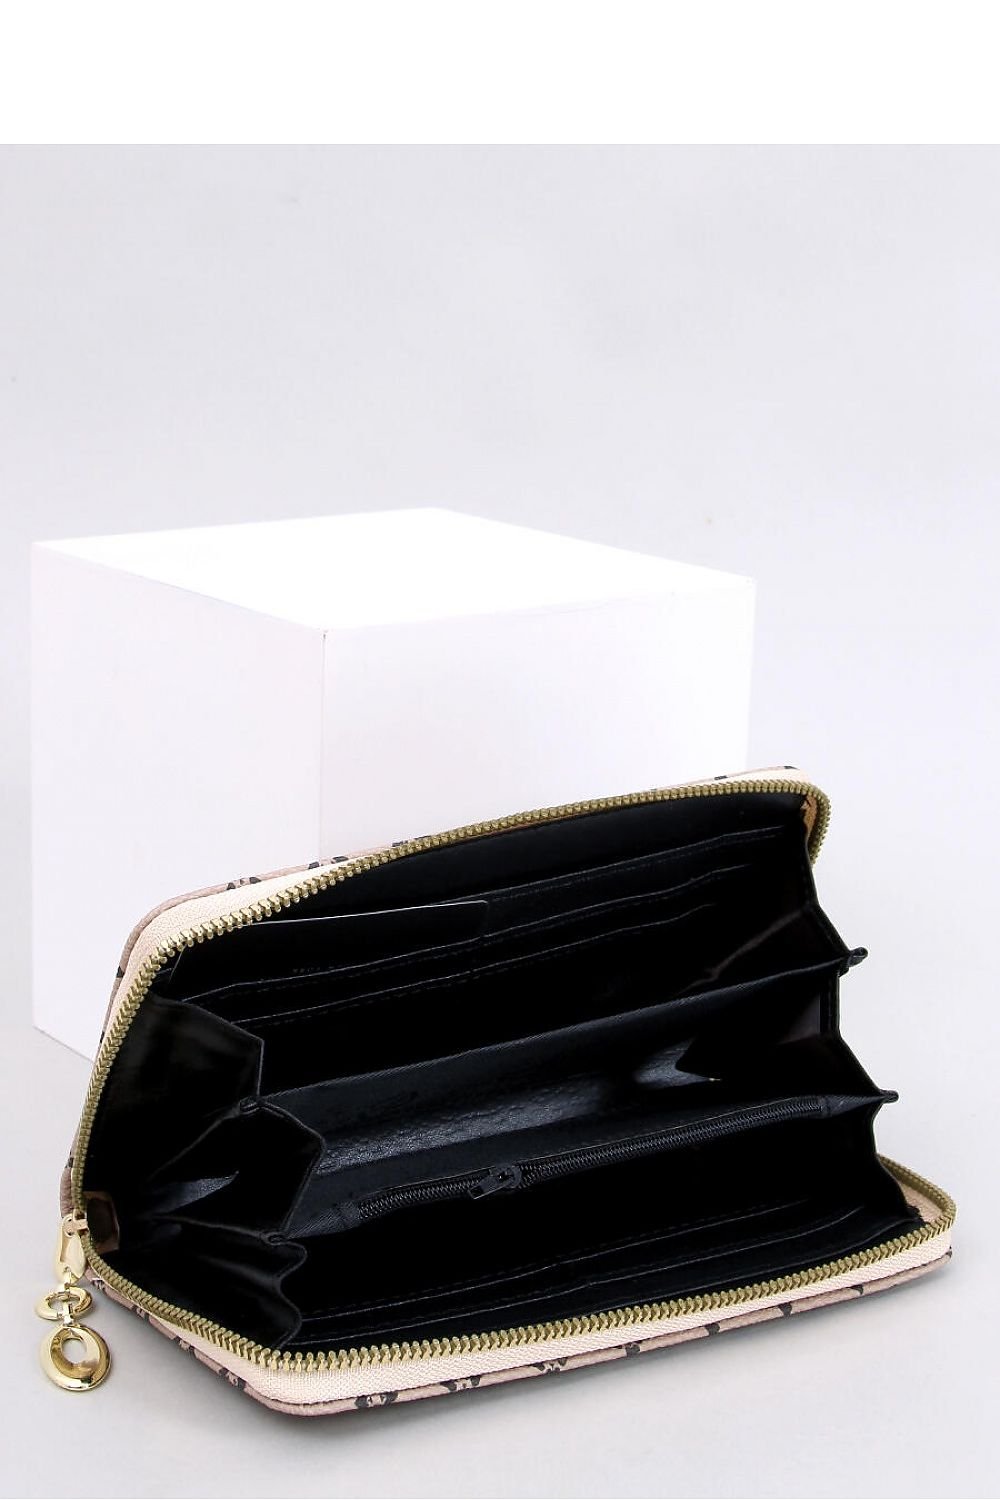 Wallet - M&H FashionWalletM&H FashionM&H Fashion192413_1116805one-size-fits-allWallet InelloM&H FashionM&H FashionWomen's wallet with an additional strap. The stylish design and gold finish will surely steal your hearts : ) It is zippered and has numerous compartments, card tabsWallet